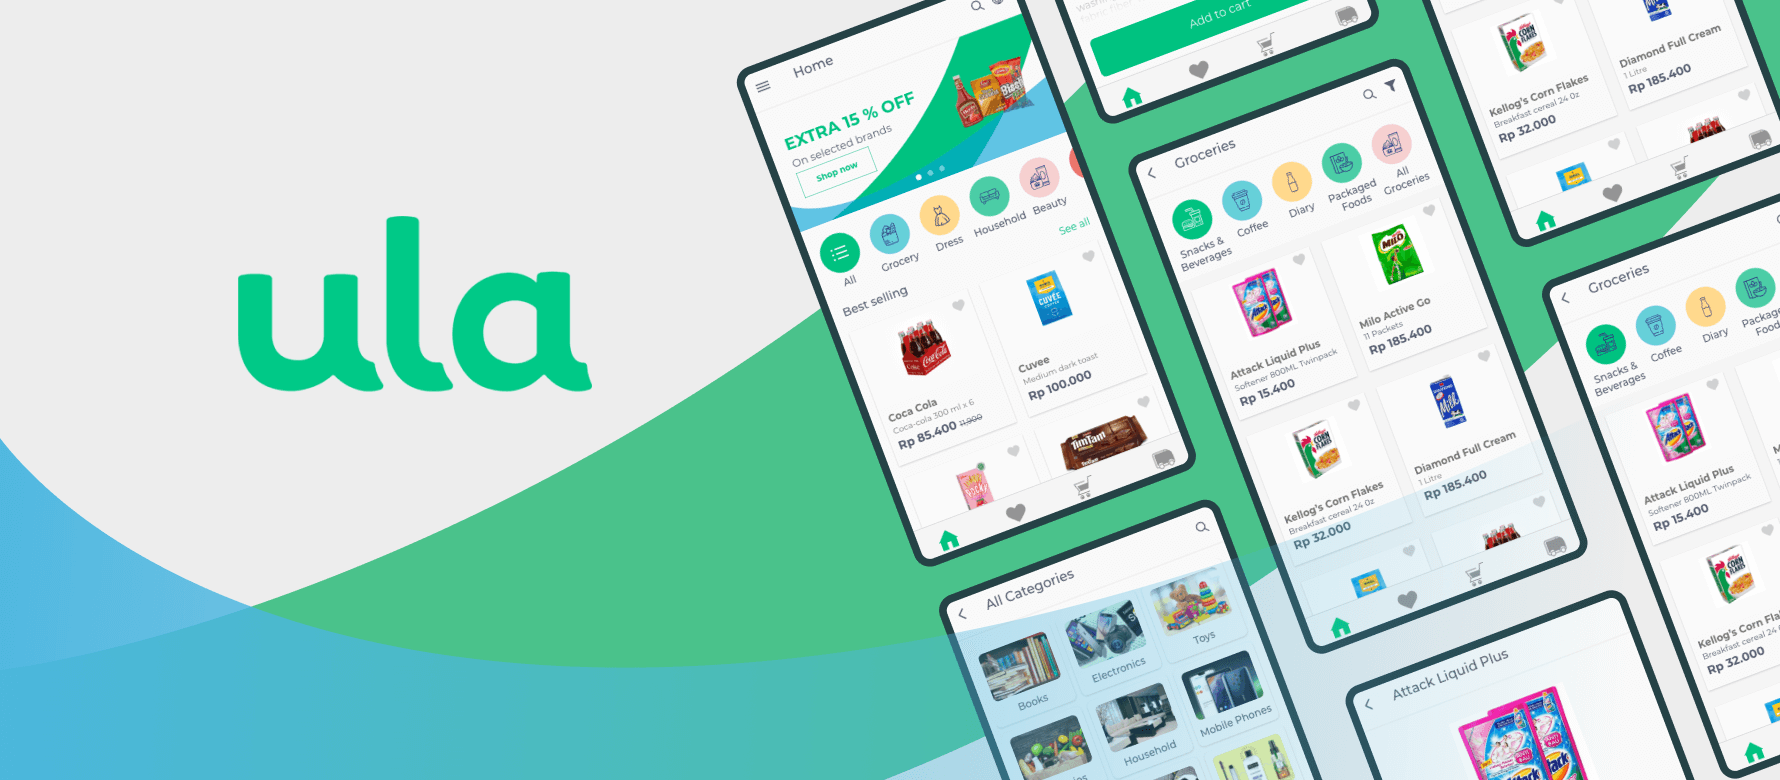 Case Study | App screen design of Ula, a full-fledged digital platform for Indonesia’s wholesale E-Commerce marketplace, that provides working capital and inventory sourcing for small business owners